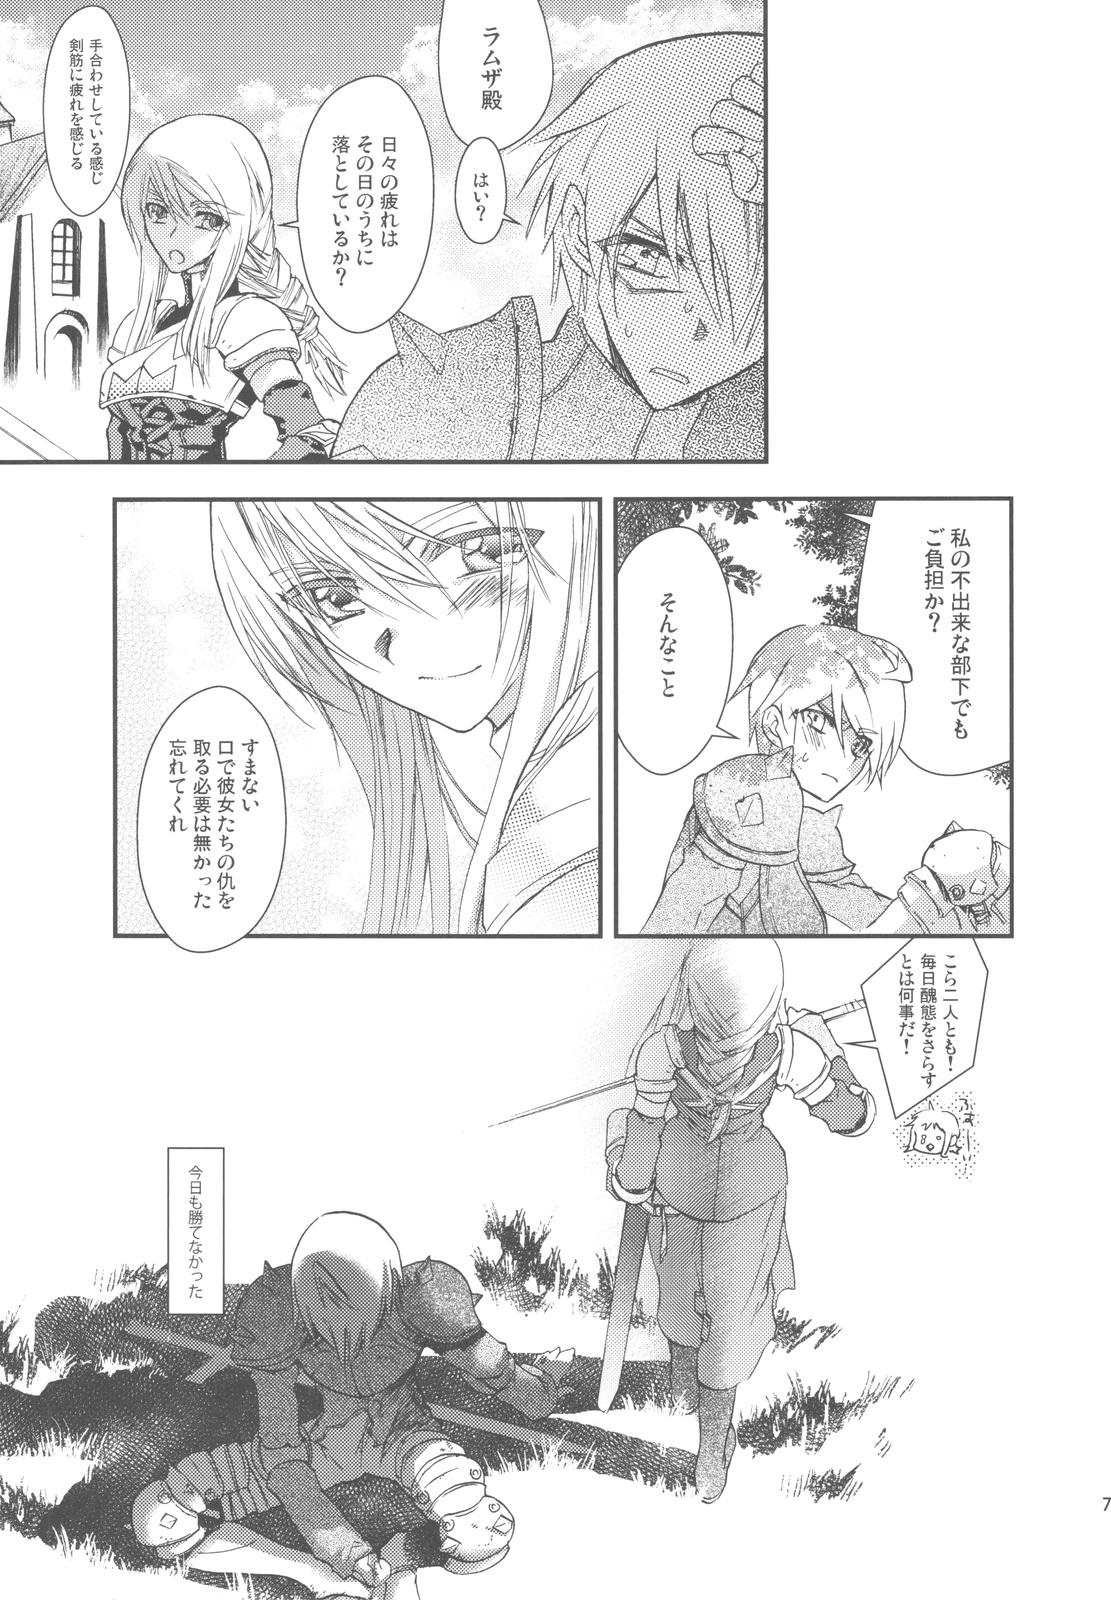 Young NamelessDance with Agrius - Final fantasy tactics Mum - Page 7